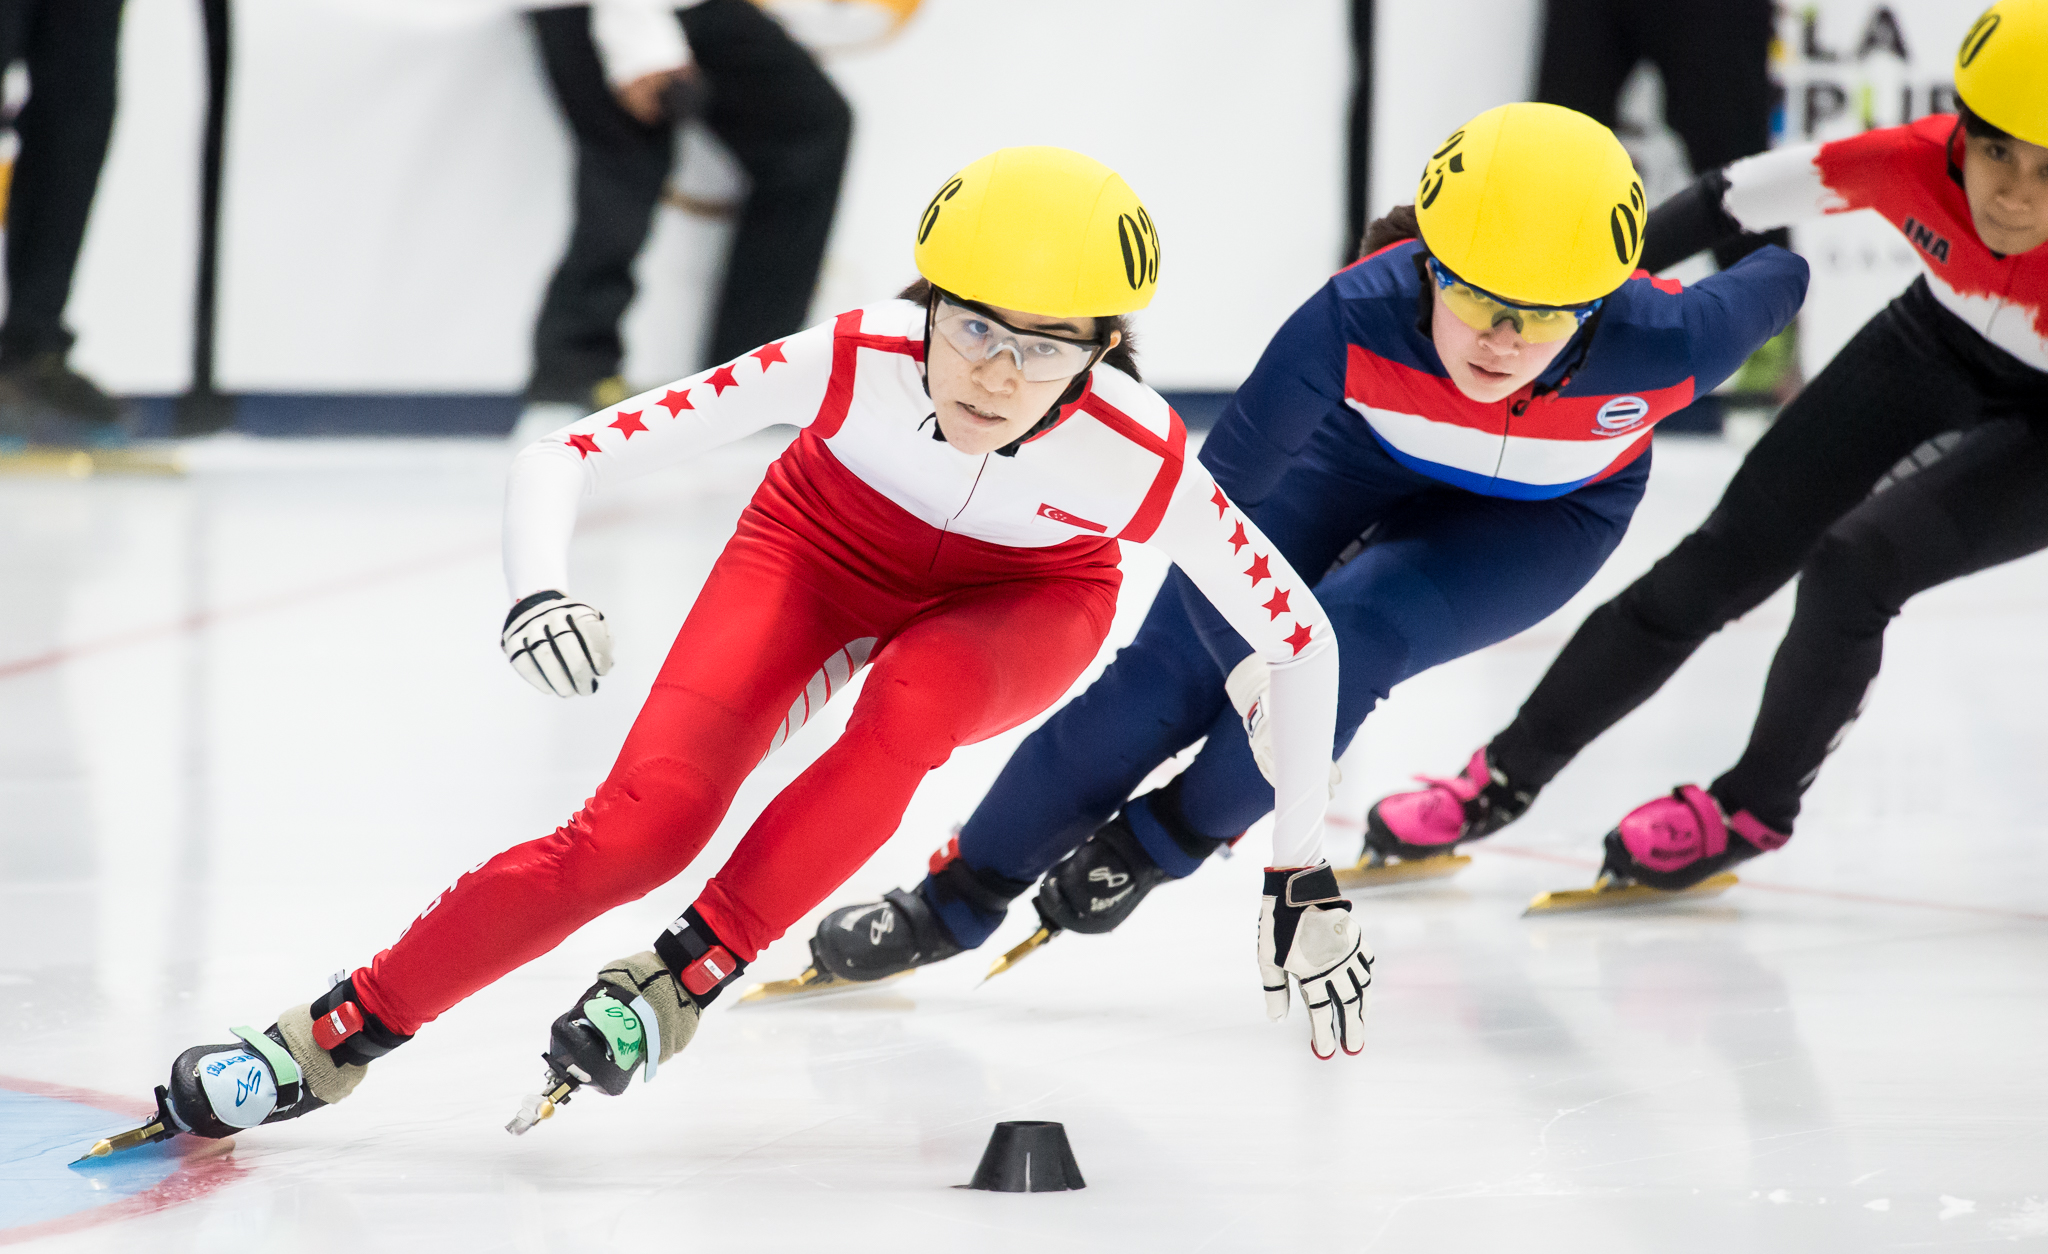 Singaporean, Thai and Indonesian speed skaters in action during the SEA Games at the Empire City Skating Rink.